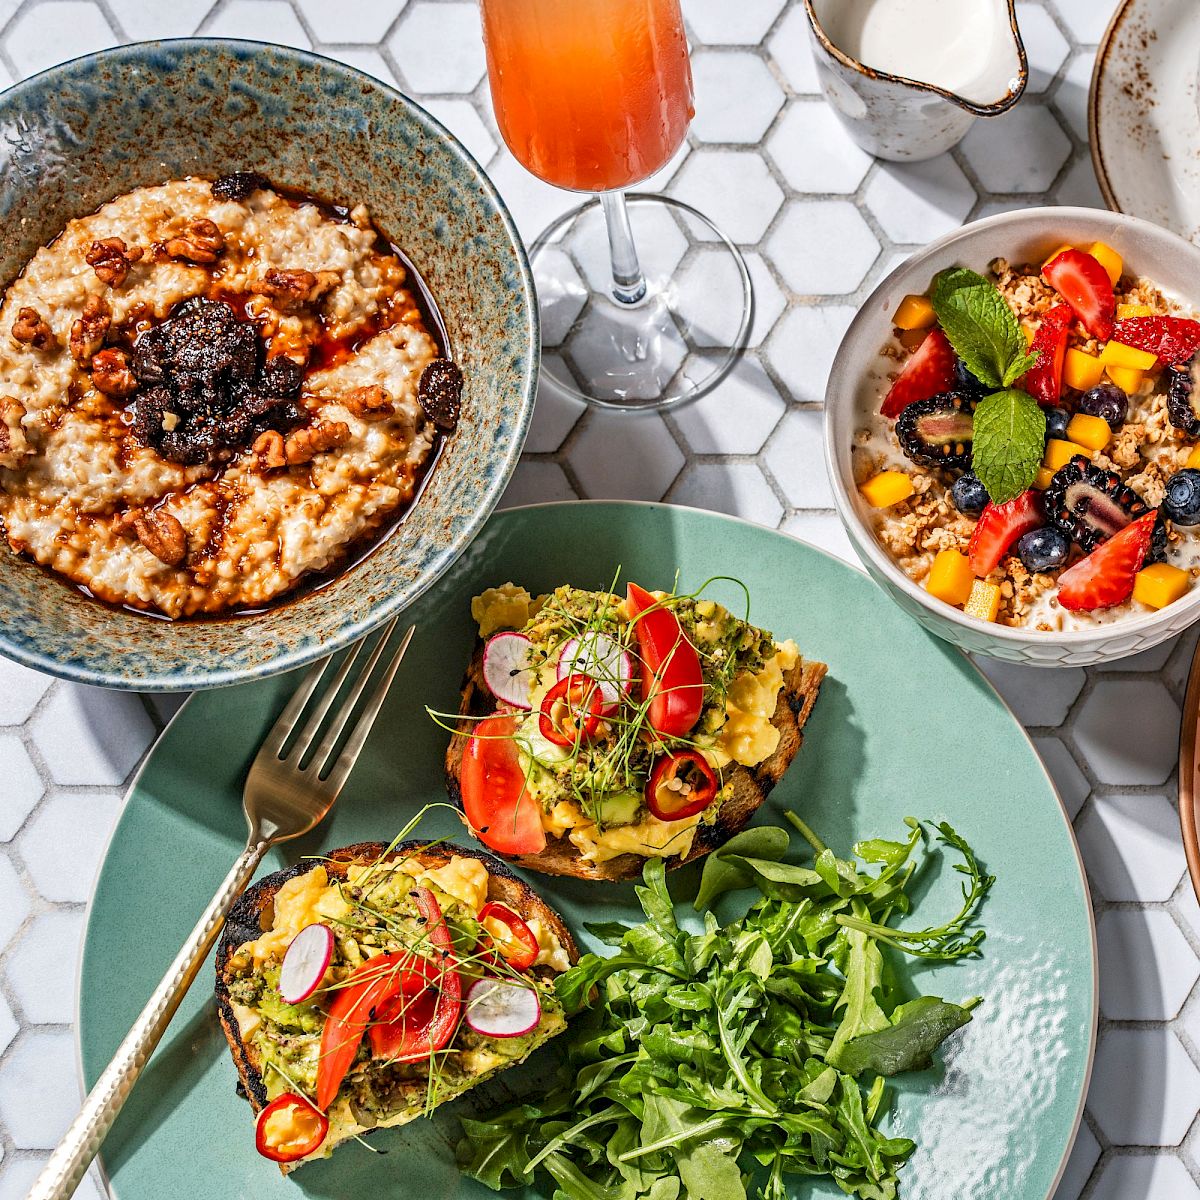 The image shows a variety of breakfast items including avocado toast, grilled grapefruit, oatmeal, a bowl of fruit, coffee, and a tall beverage.